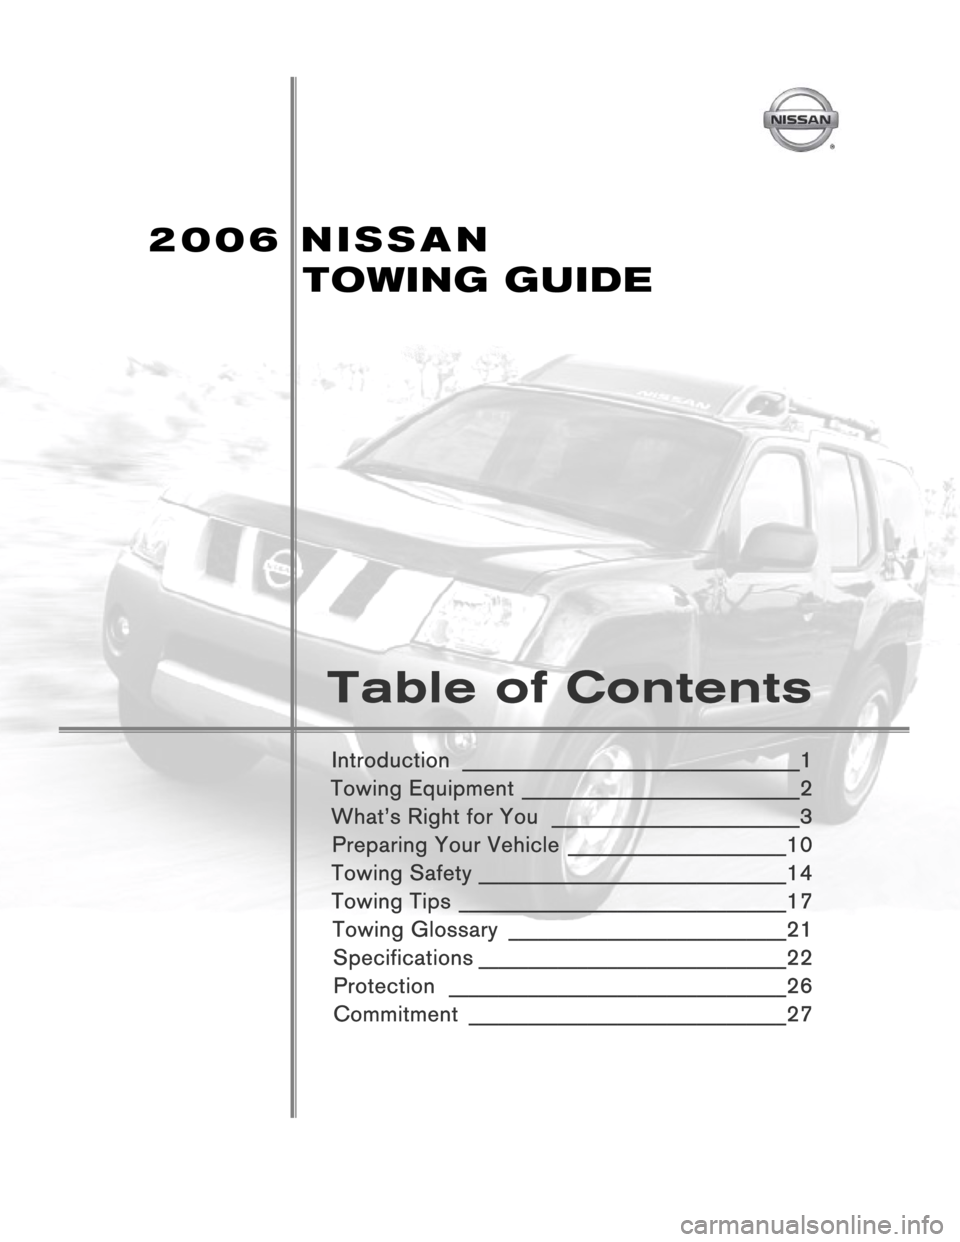 NISSAN ALTIMA 2006 L31 / 3.G Towing Guide  
 
 
 
 
 
 
 
 
 
 
 
 
 
 
 
 
 
 
 
 
 
Table of Contents 
 
Introduction __________________________________1 
Towing Equipment
 ____________________________2 
What’s Right for You
 ____________